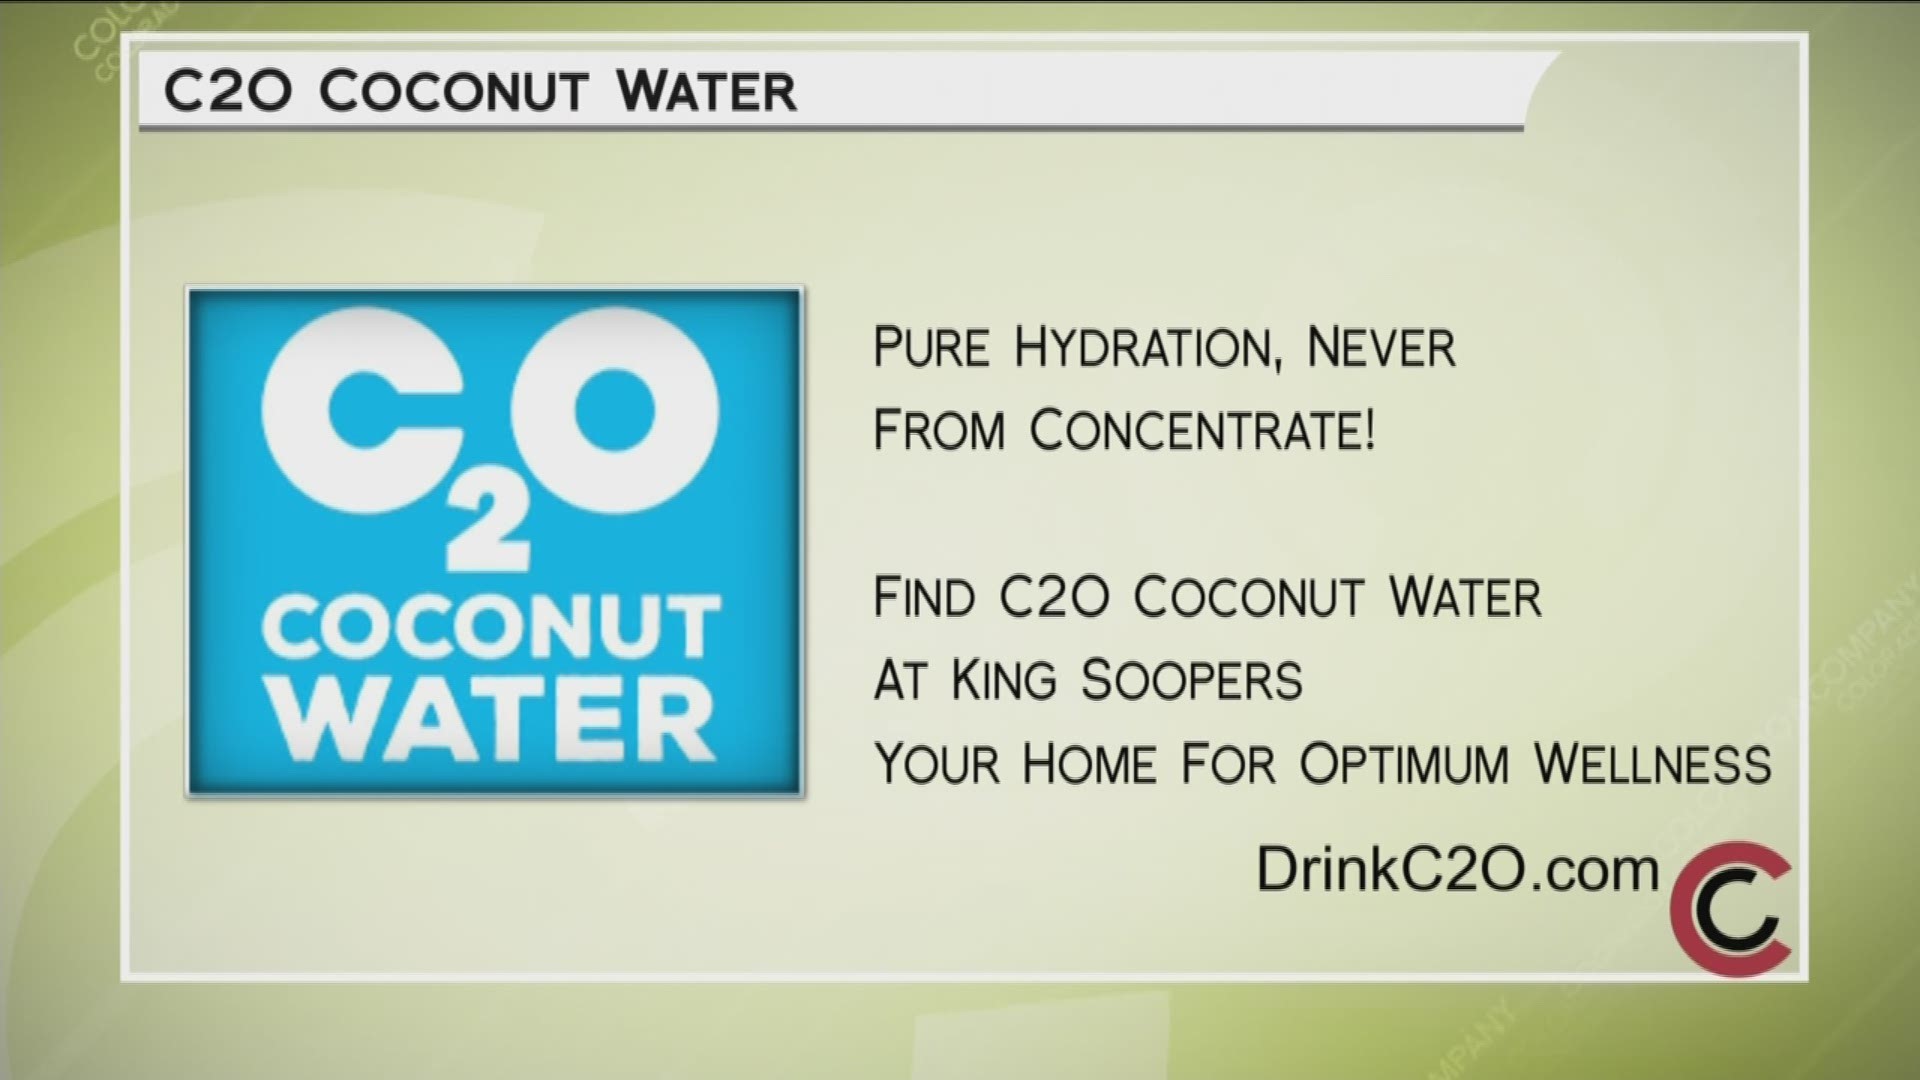 You can find C2O Coconut water at King Soopers, your home for Optimum Wellness. Find recipes at www.DrinkC2O.com. 
THIS INTERVIEW HAS COMMERCIAL CONTENT. PRODUCTS AND SERVICES FEATURED APPEAR AS PAID ADVERTISING.